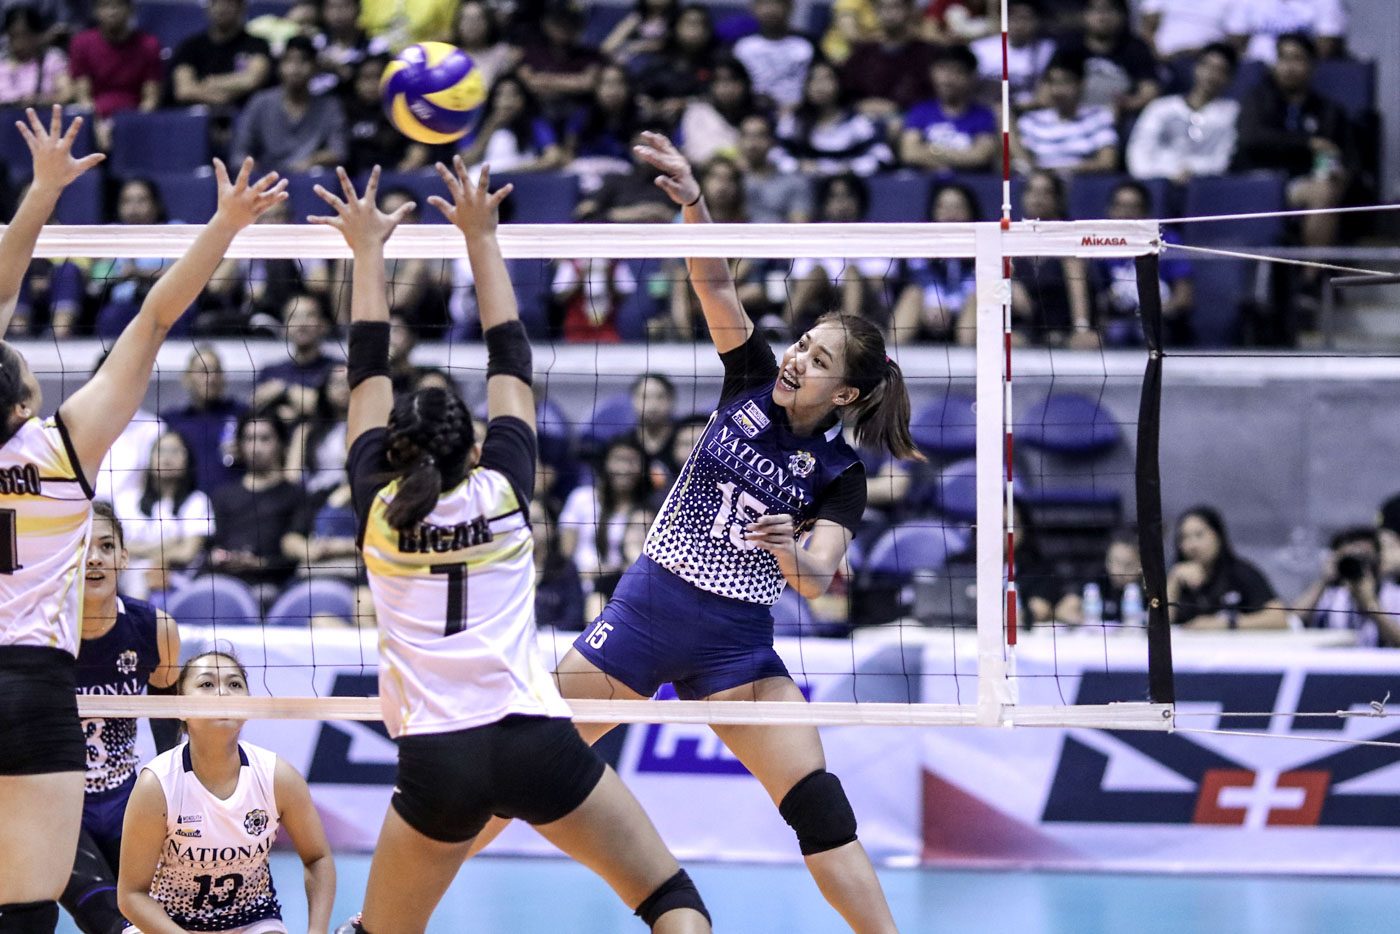 WATCH: Young NU Lady Bulldogs dare to challenge league vets